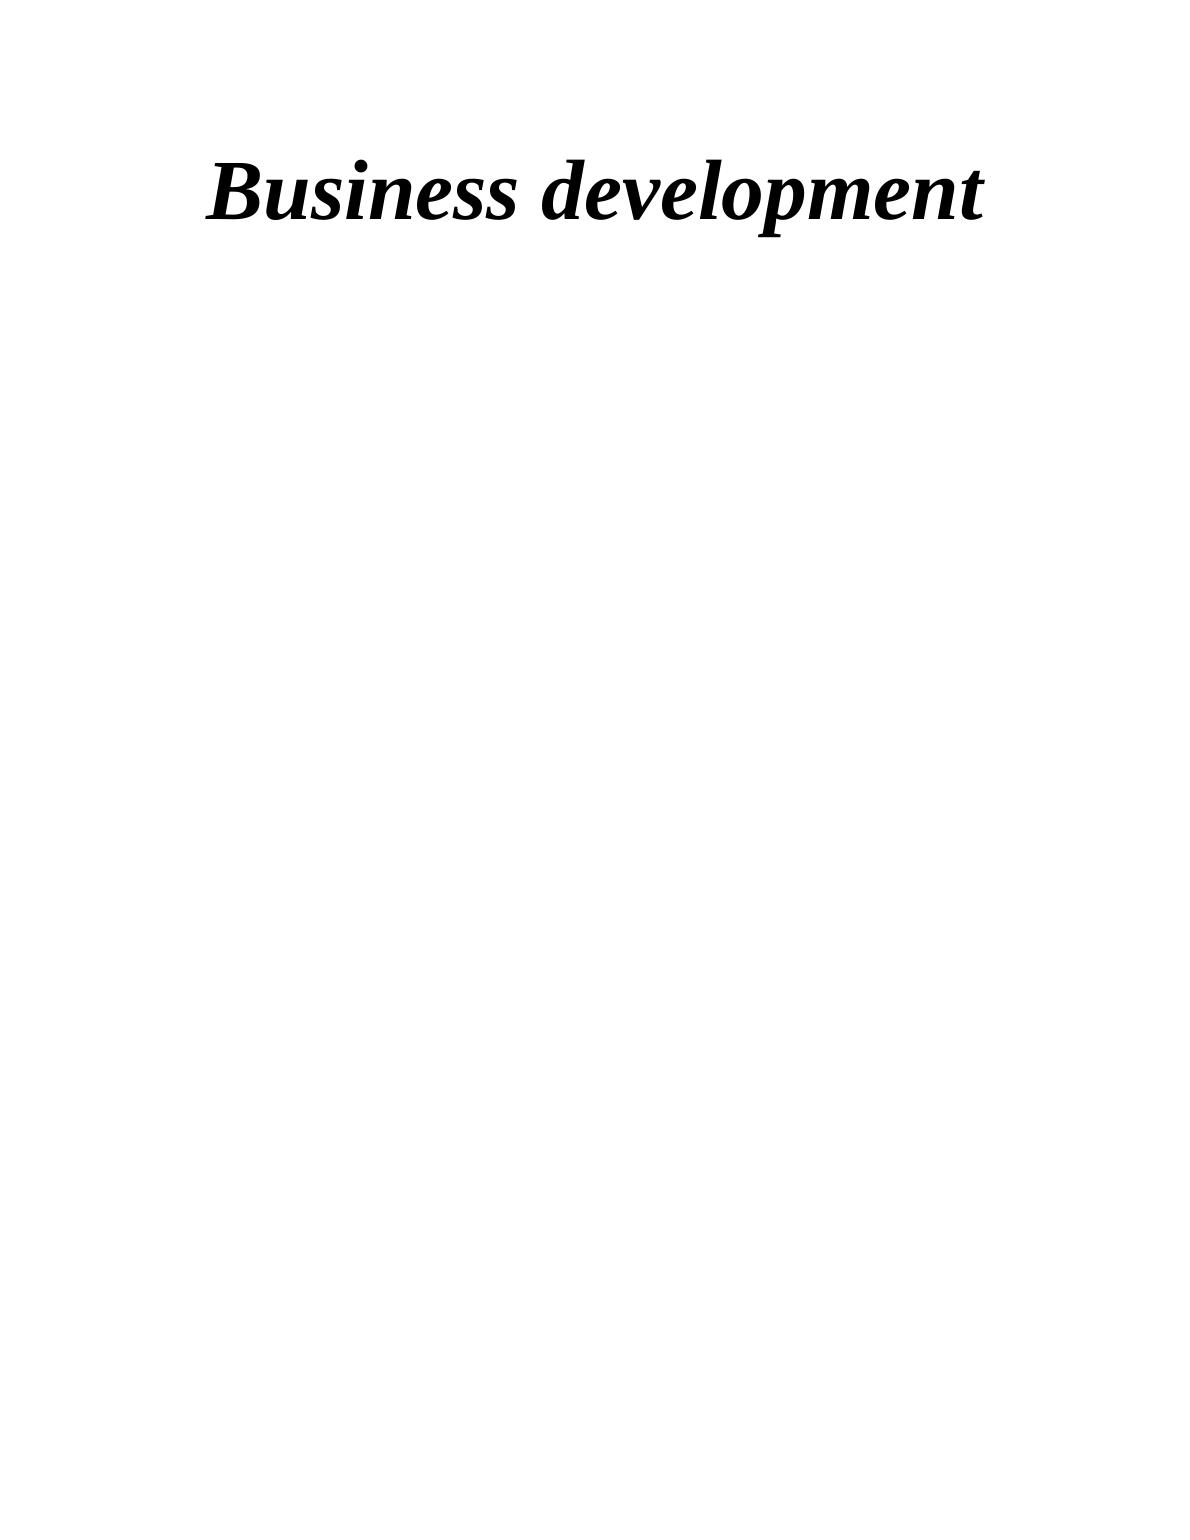 Business development plan for a new online retail shop in London, UK_1